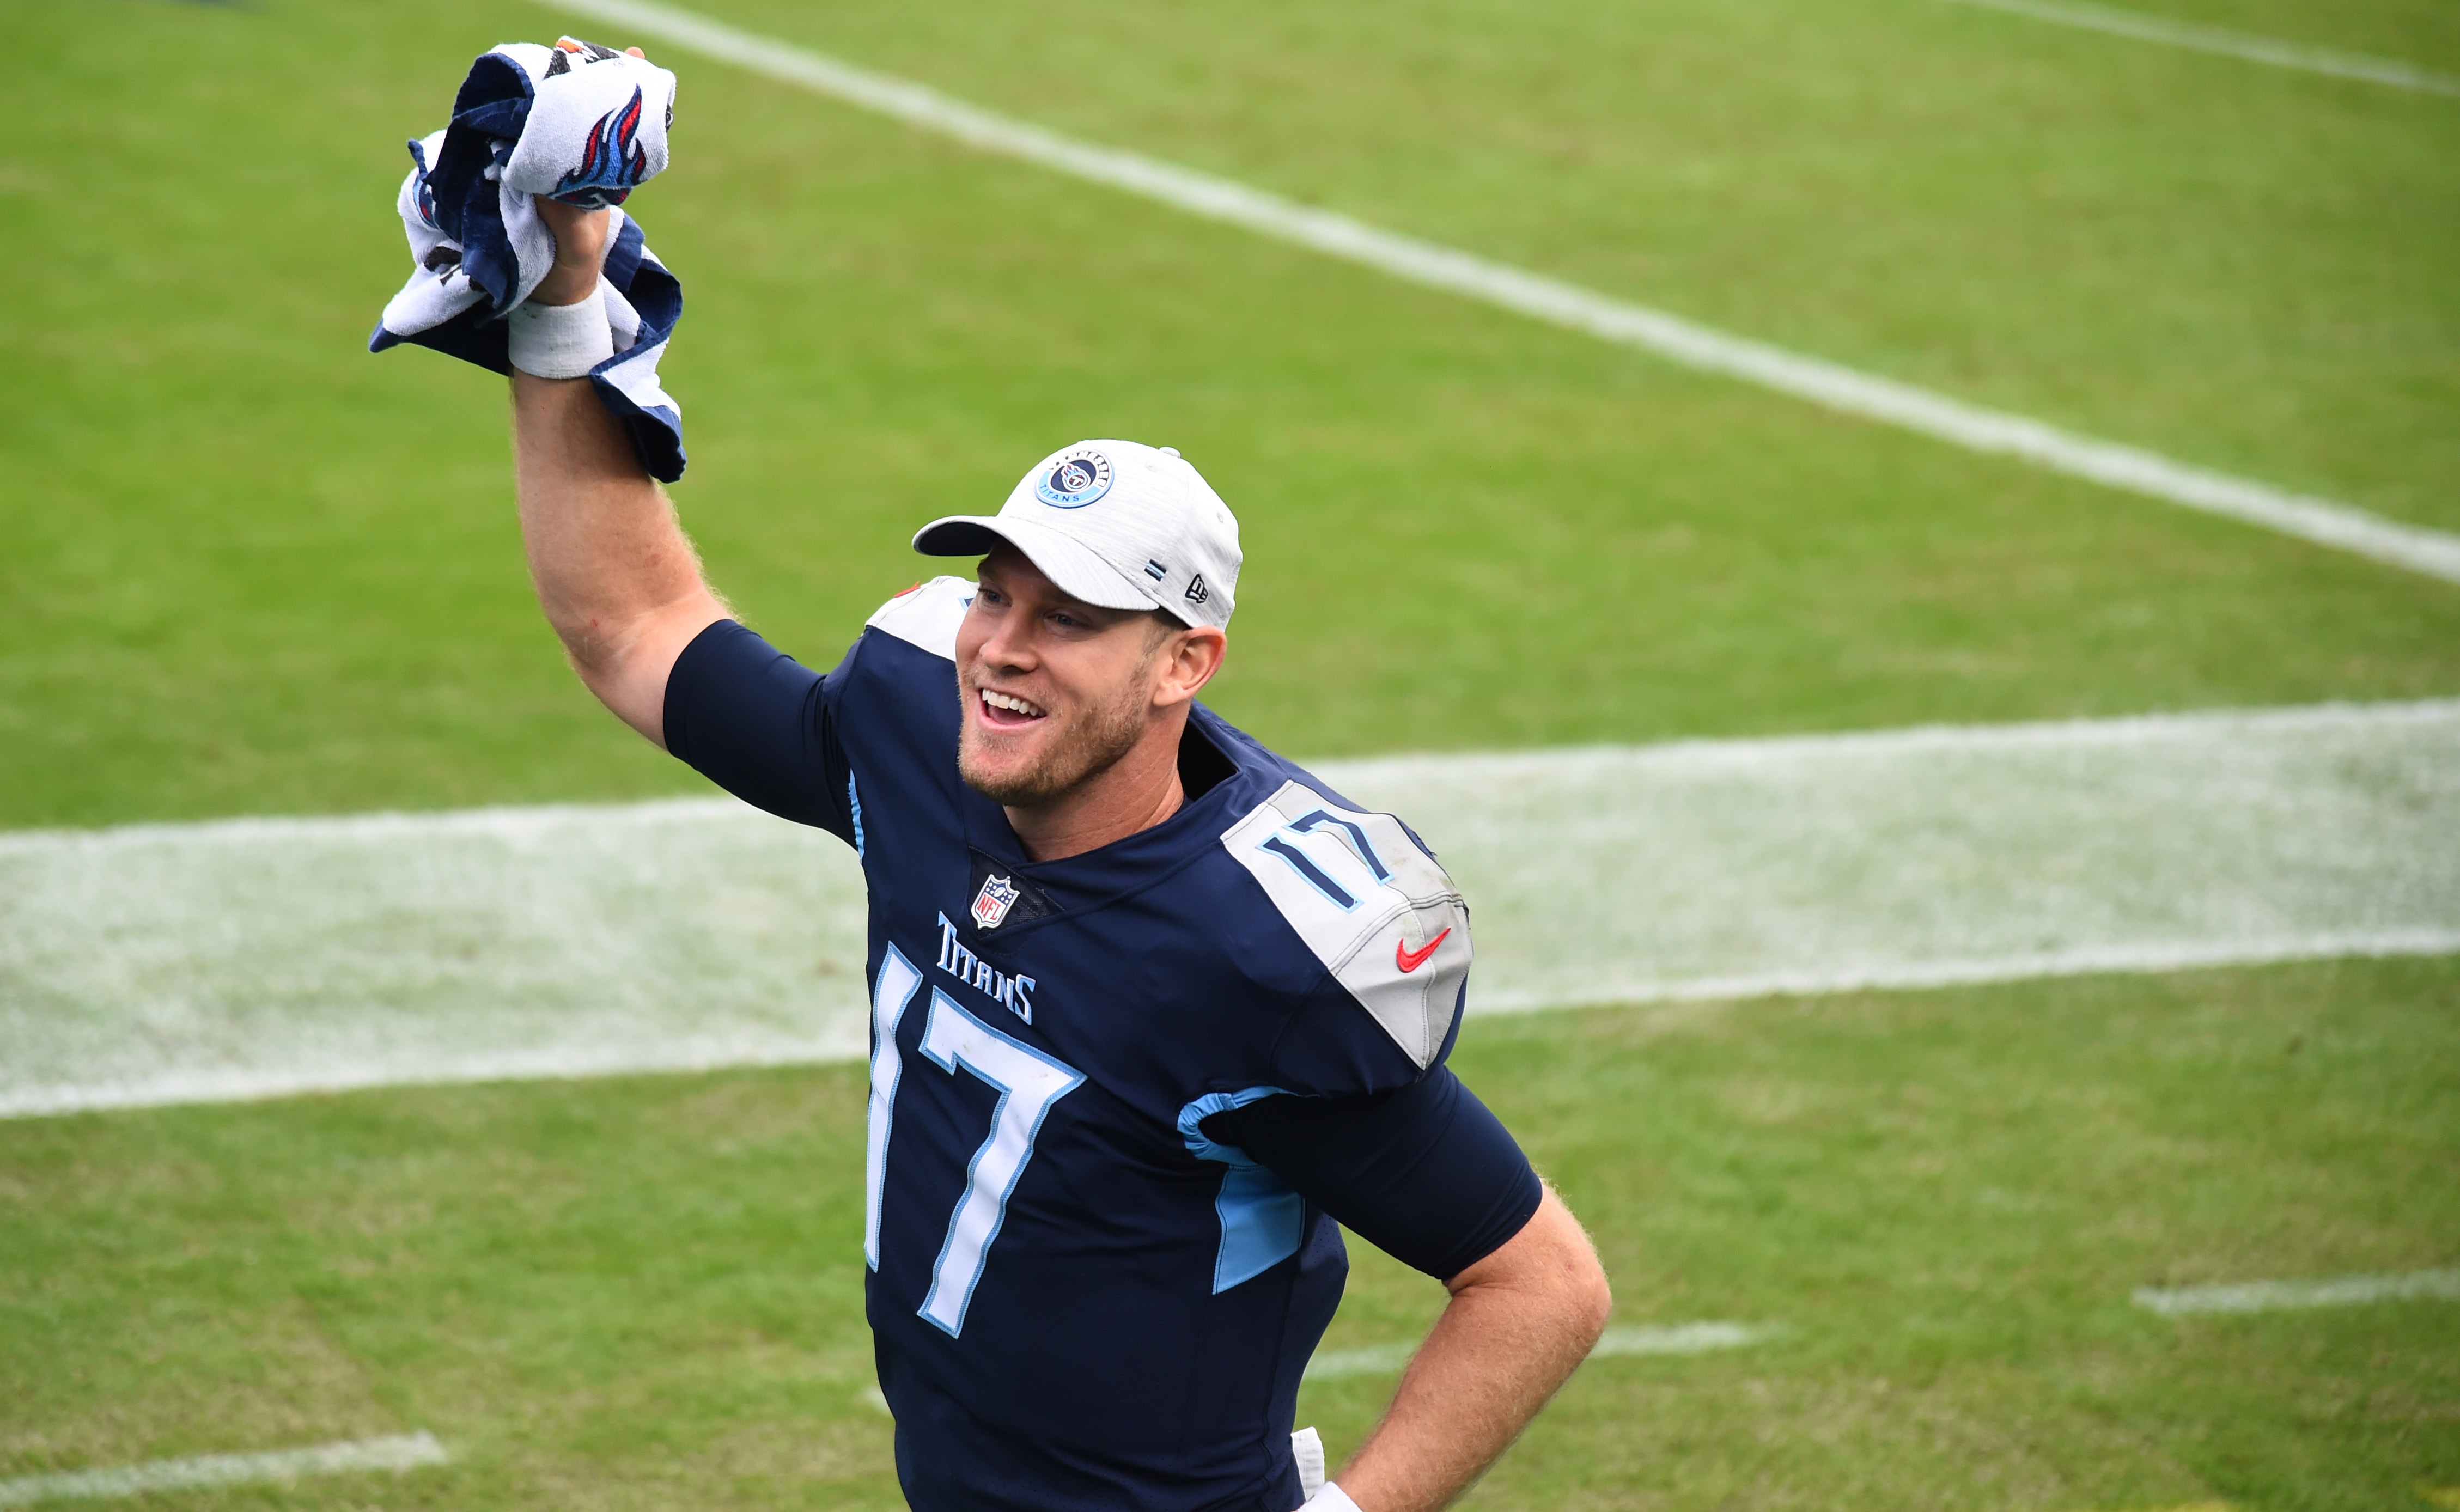 NFL: Houston Texans at Tennessee Titans